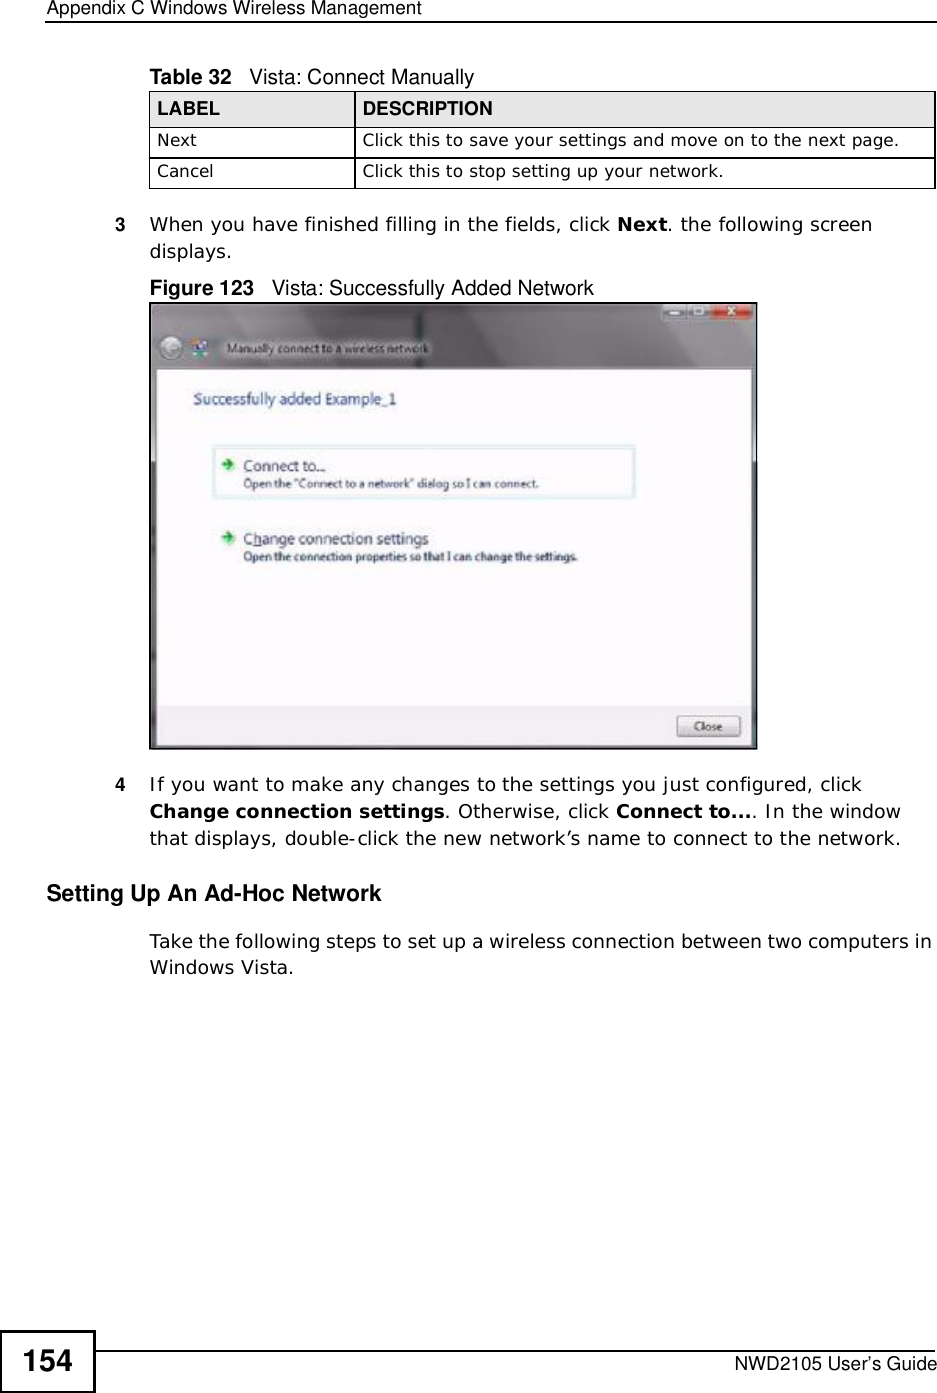 Appendix CWindows Wireless ManagementNWD2105 User’s Guide1543When you have finished filling in the fields, click Next. the following screen displays.Figure 123   Vista: Successfully Added Network4If you want to make any changes to the settings you just configured, click Change connection settings. Otherwise, click Connect to.... In the window that displays, double-click the new network’s name to connect to the network.Setting Up An Ad-Hoc Network Take the following steps to set up a wireless connection between two computers in Windows Vista. NextClick this to save your settings and move on to the next page.CancelClick this to stop setting up your network.Table 32   Vista: Connect ManuallyLABEL DESCRIPTION